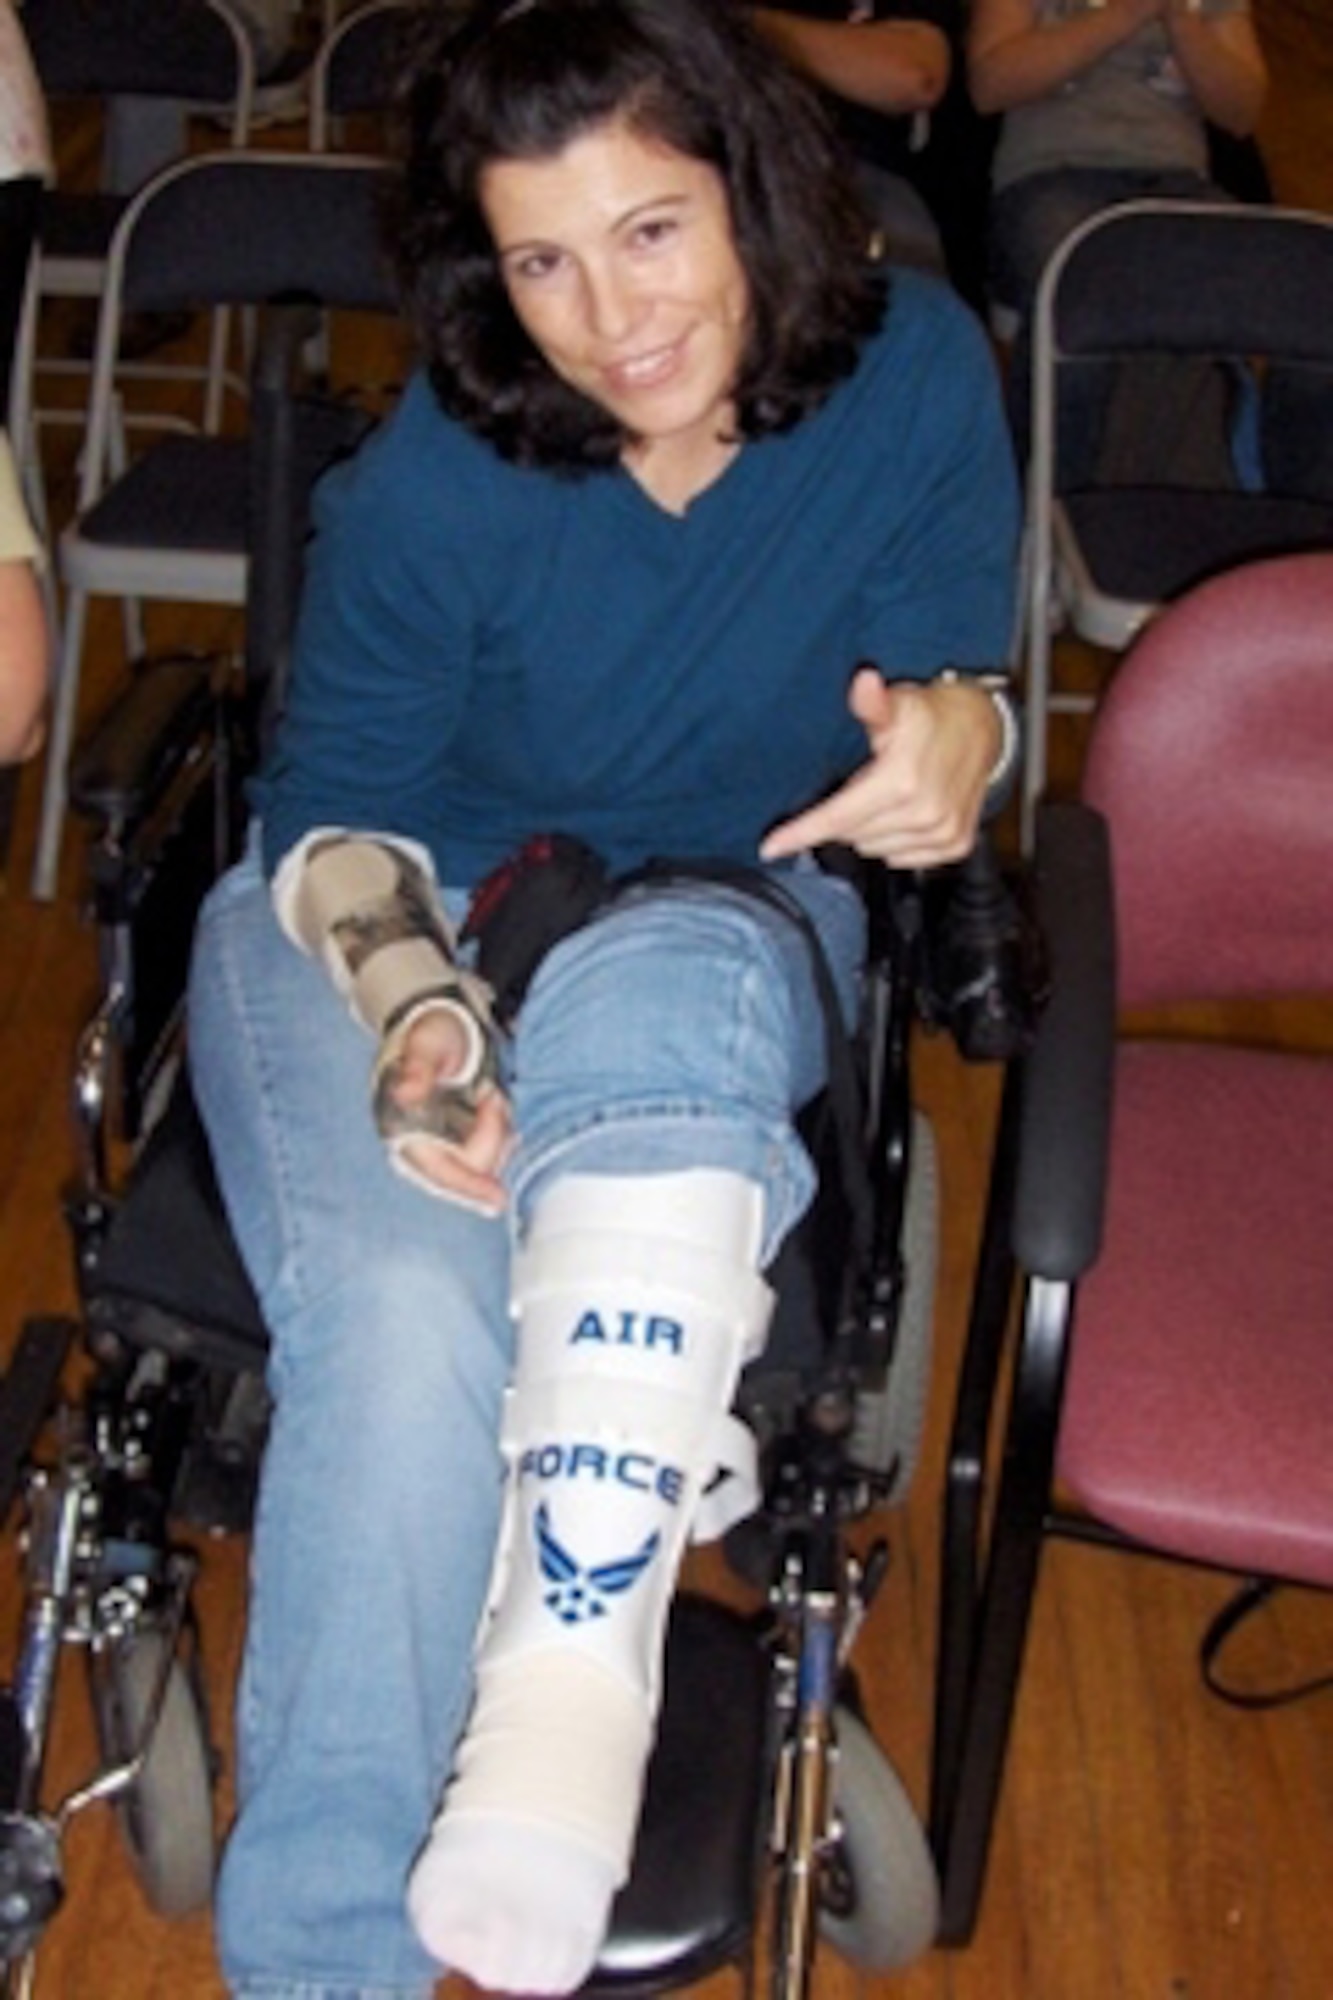 Senior Airman Diane Lopes, a reservist with the 920th Rescue Wing at Patrick Air Force Base, Fla., displays her Air Force pride while rehabilitating from a rocket attack. The security forces specialist was wounded Sept. 21 at Kirkuk Air Base, Iraq just four weeks after being deployed there. The cast on her left leg protects the broken tibia and fibula beneath, a result of shrapnel from the blast. She said she put the Air Force logo on her cast because of the many Soldiers and Marines there with her at Walter Reed. "I had to represent," she said. (Courtesy photo)